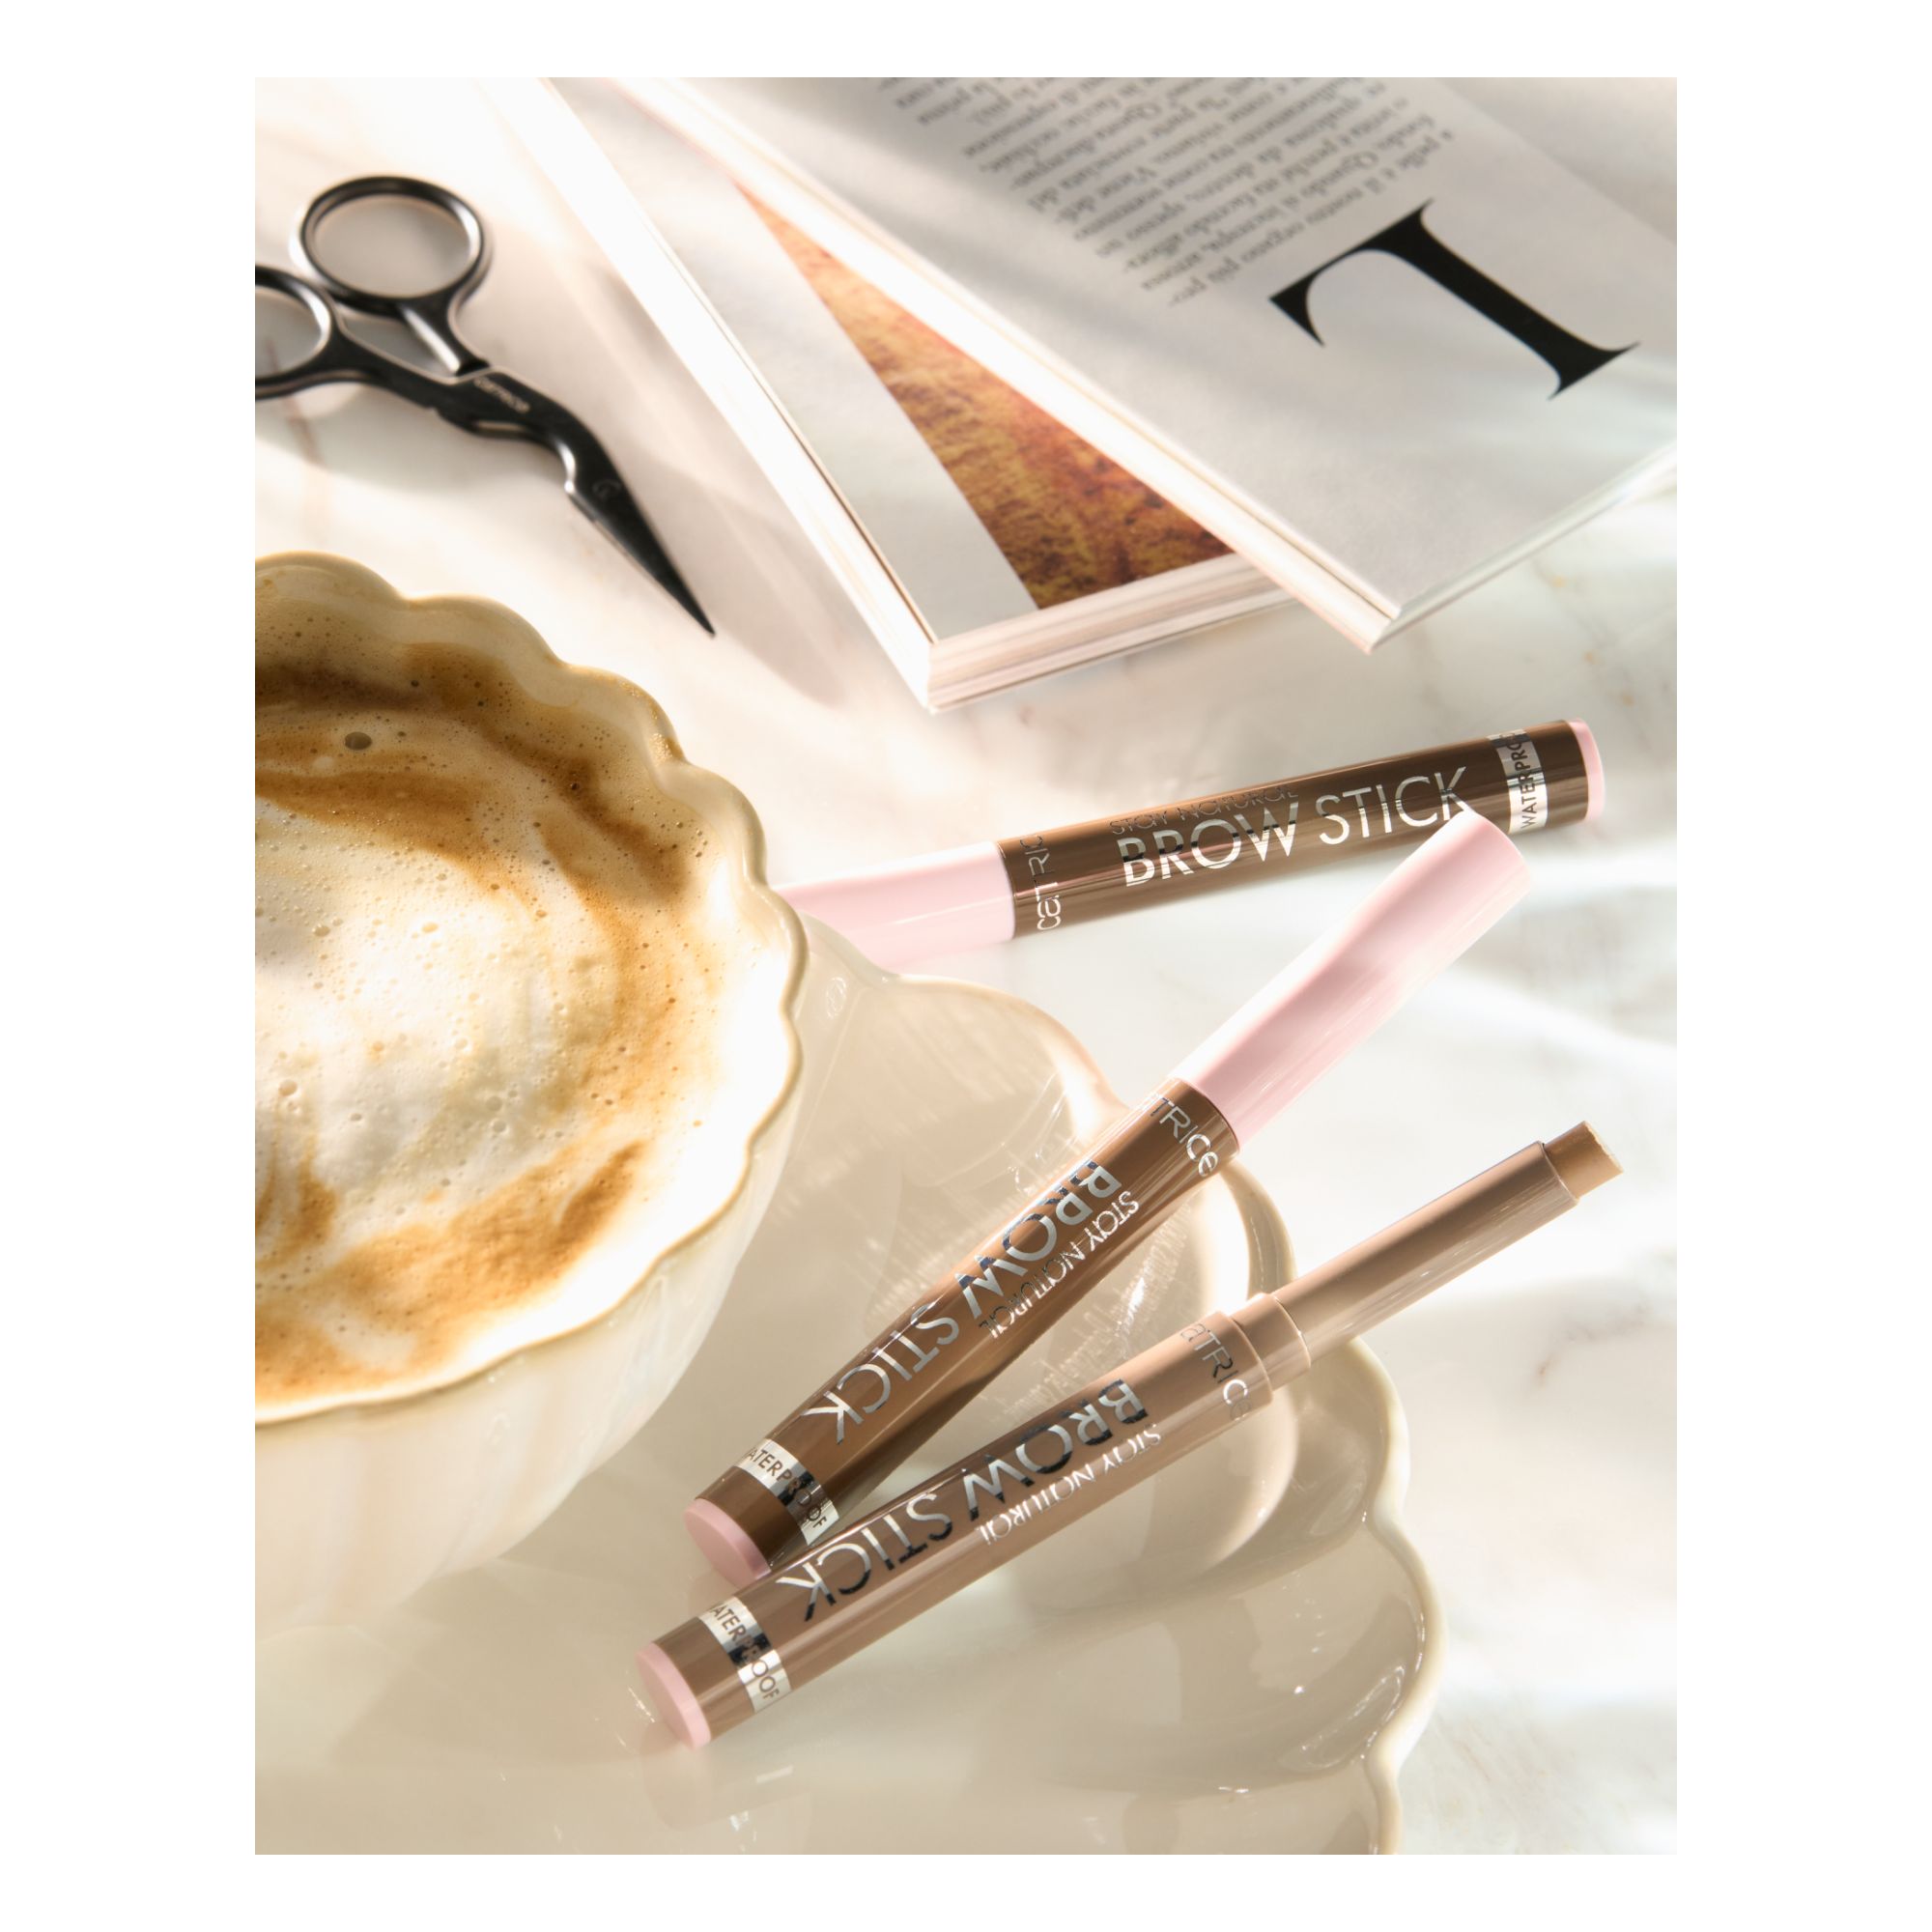 Eyebrow Pencil - Stay Natural Brow Stick